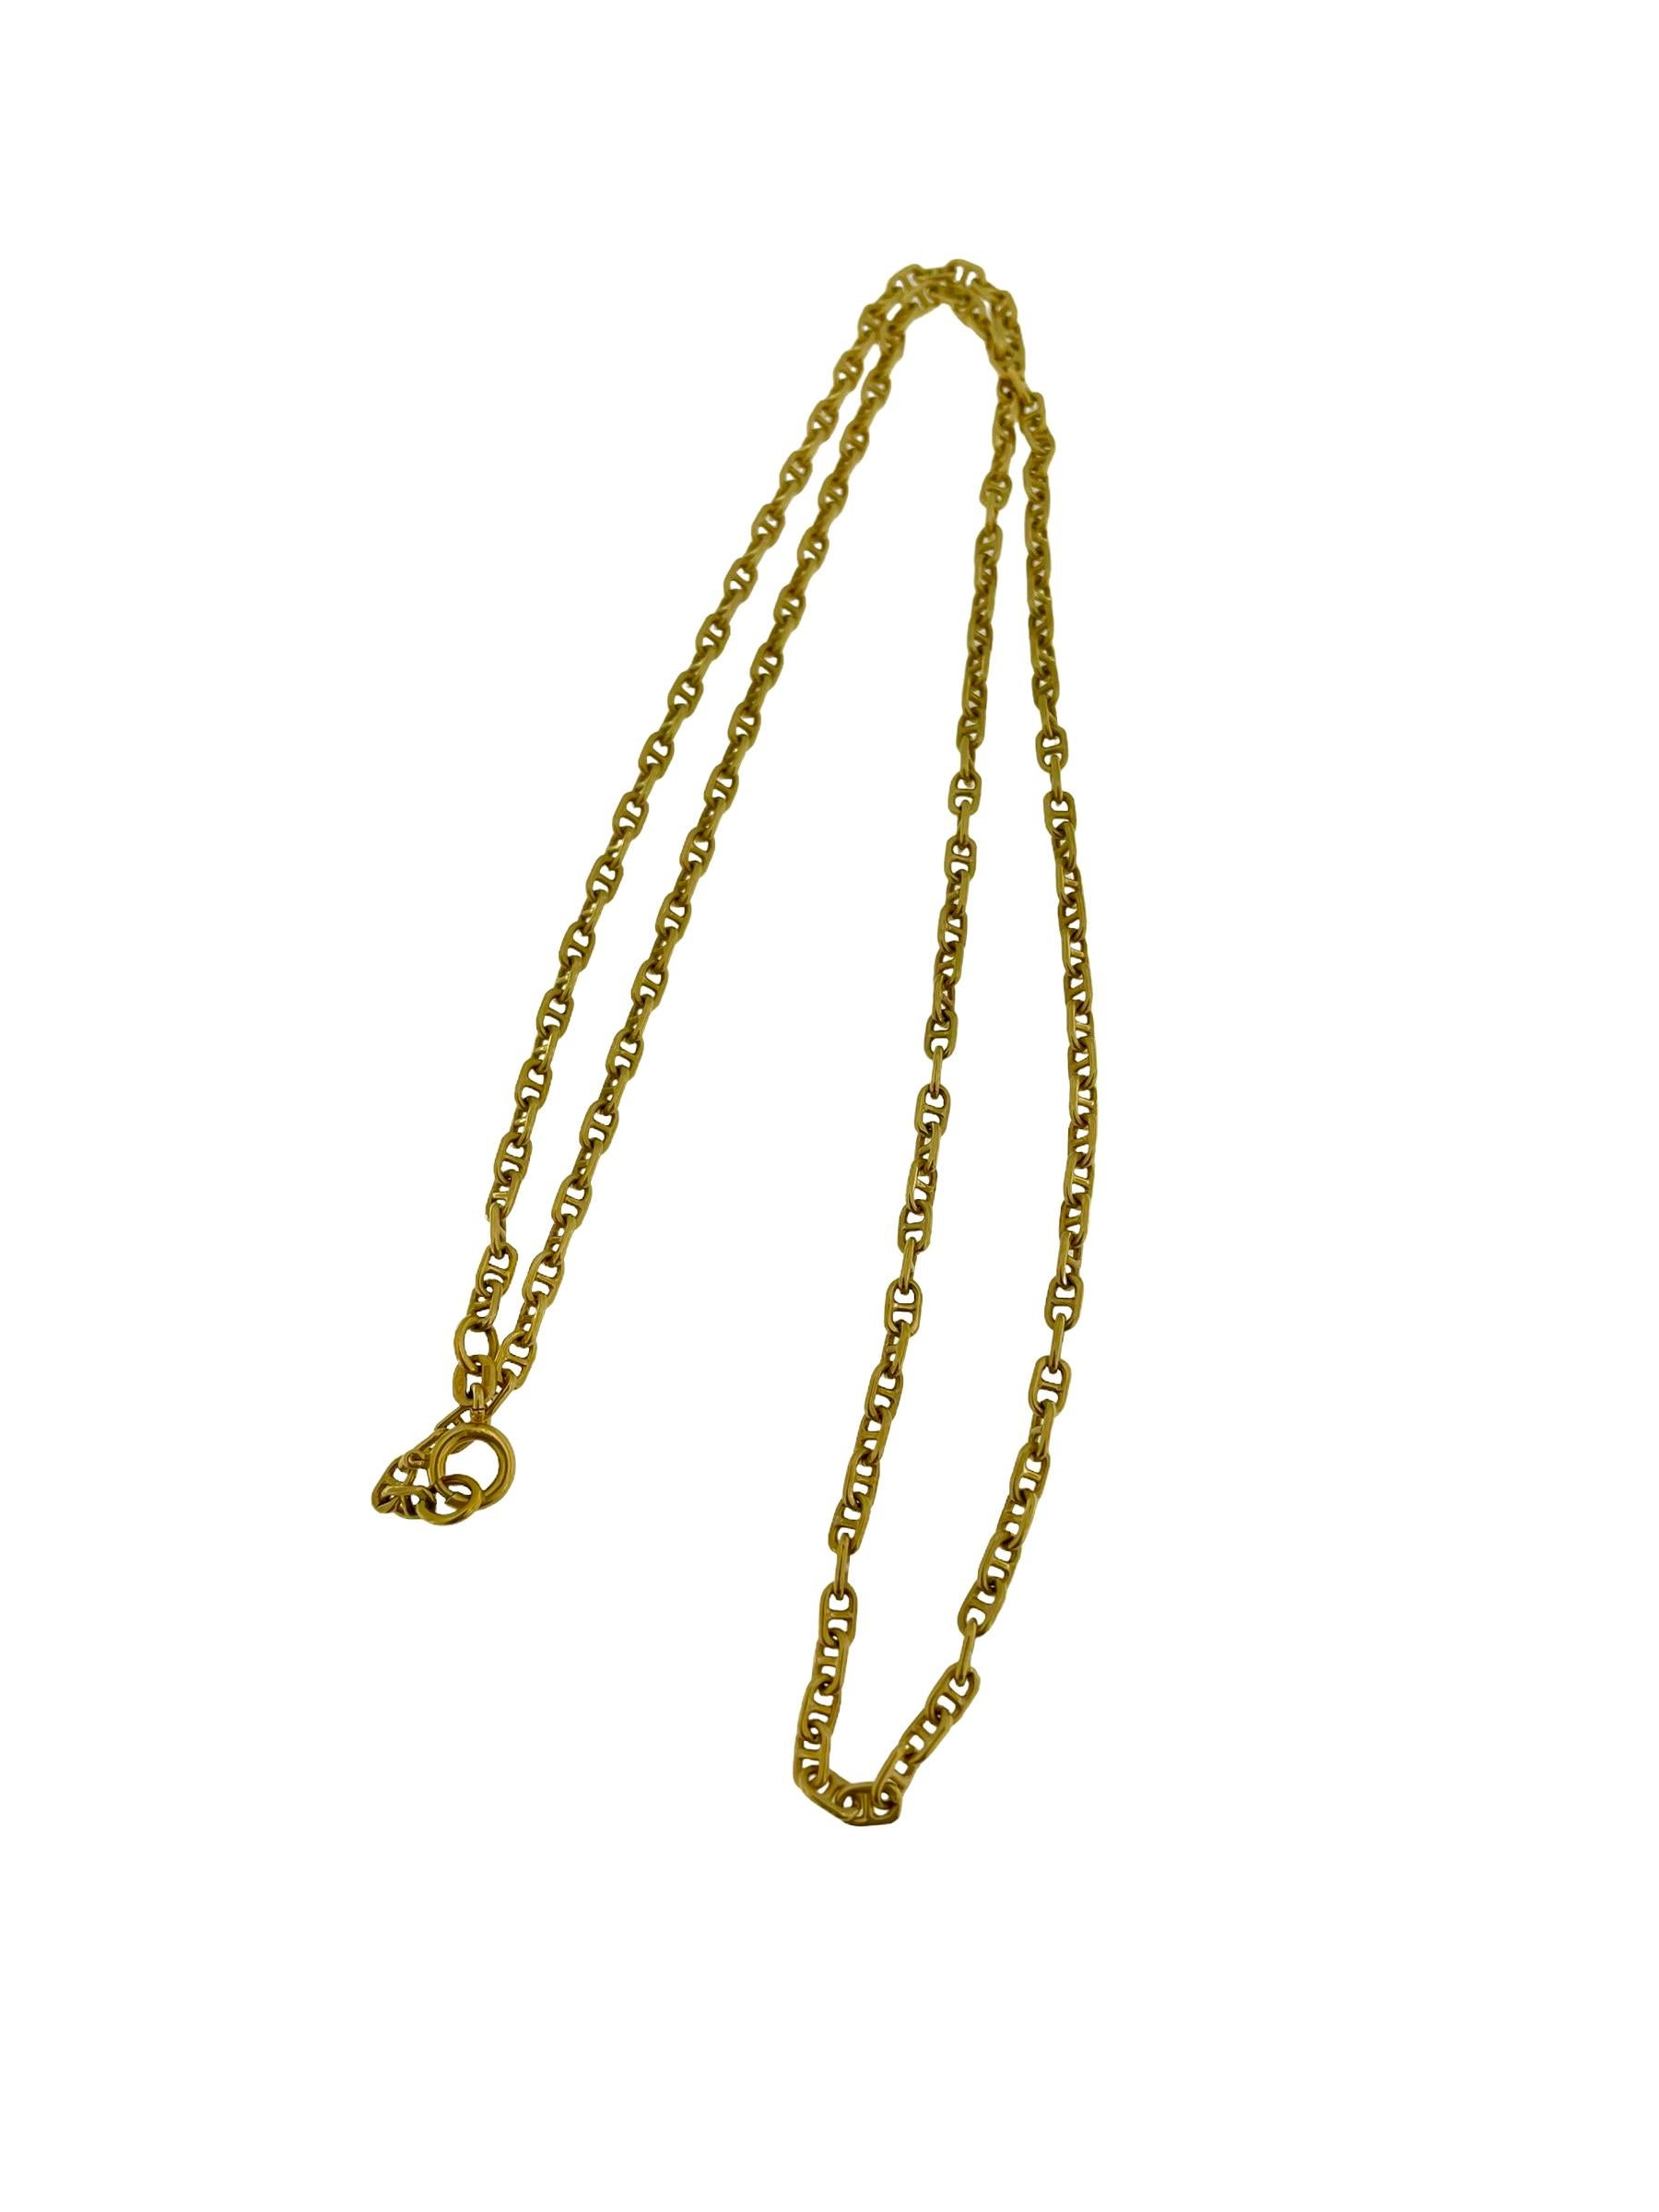 Women's or Men's Italian Mariner Link Chain Yellow Gold by Balestra For Sale